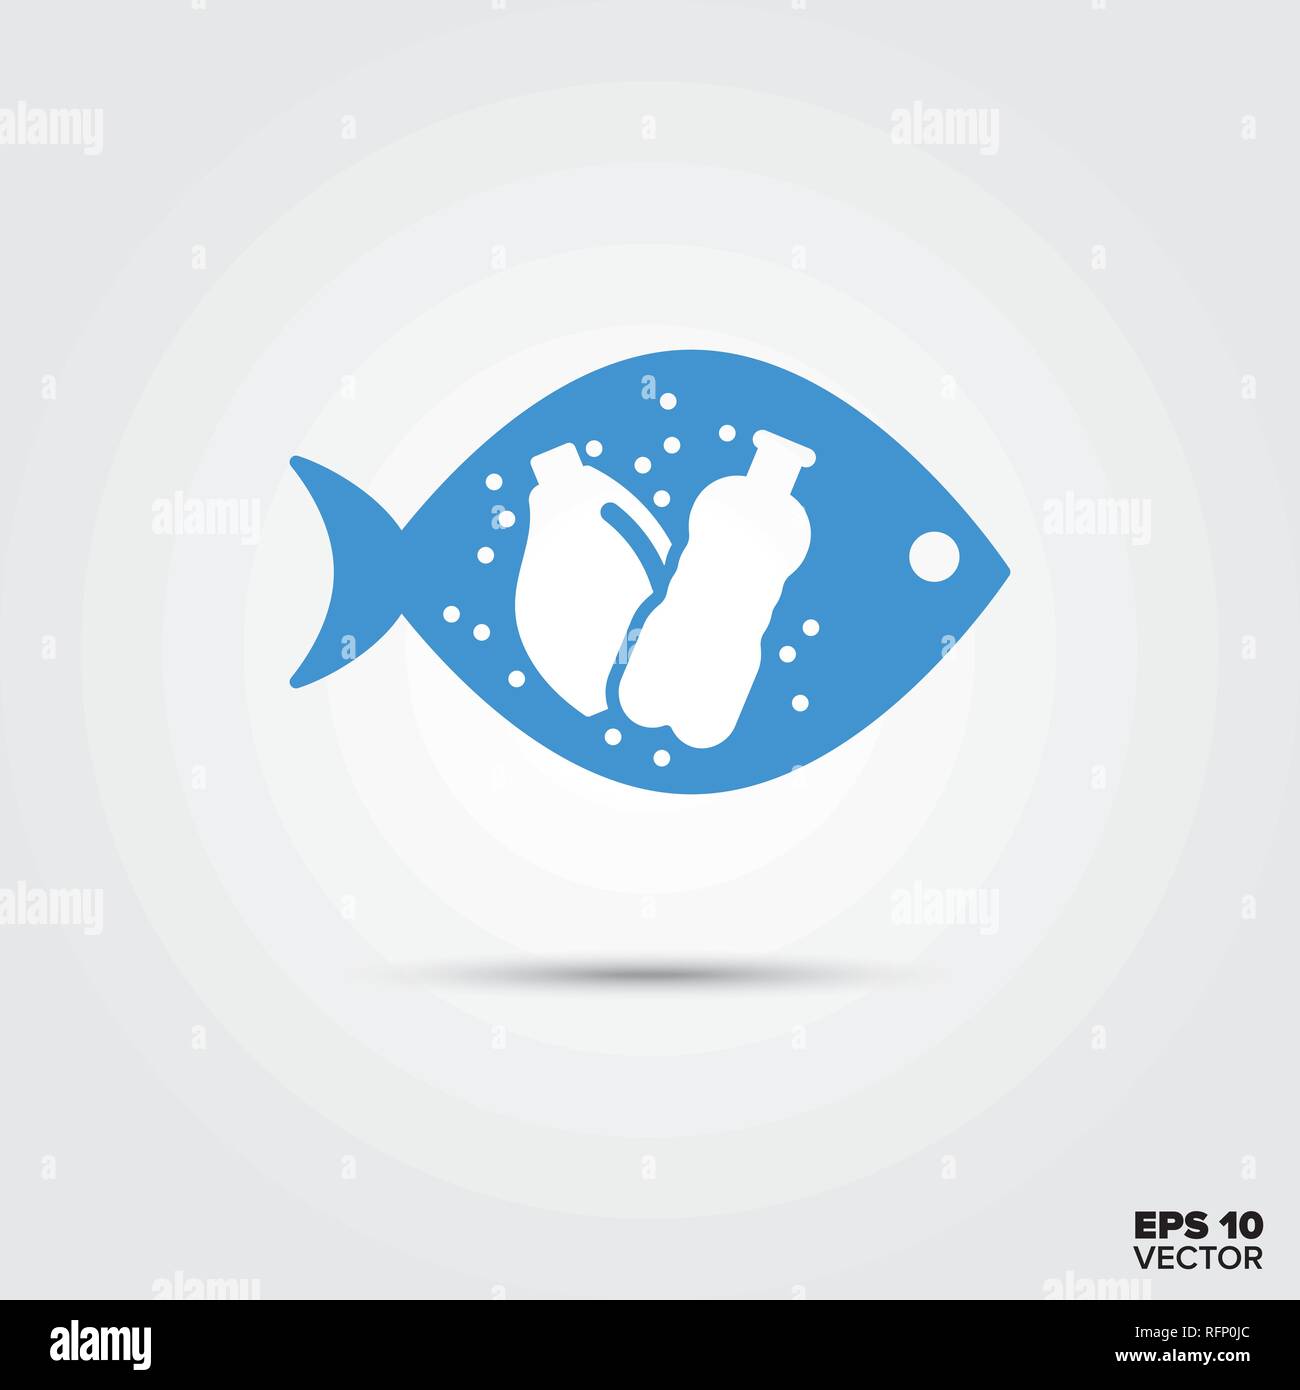 Microplastic in a fish icon, water pollution symbol. EPS 10 Vector. Stock Vector